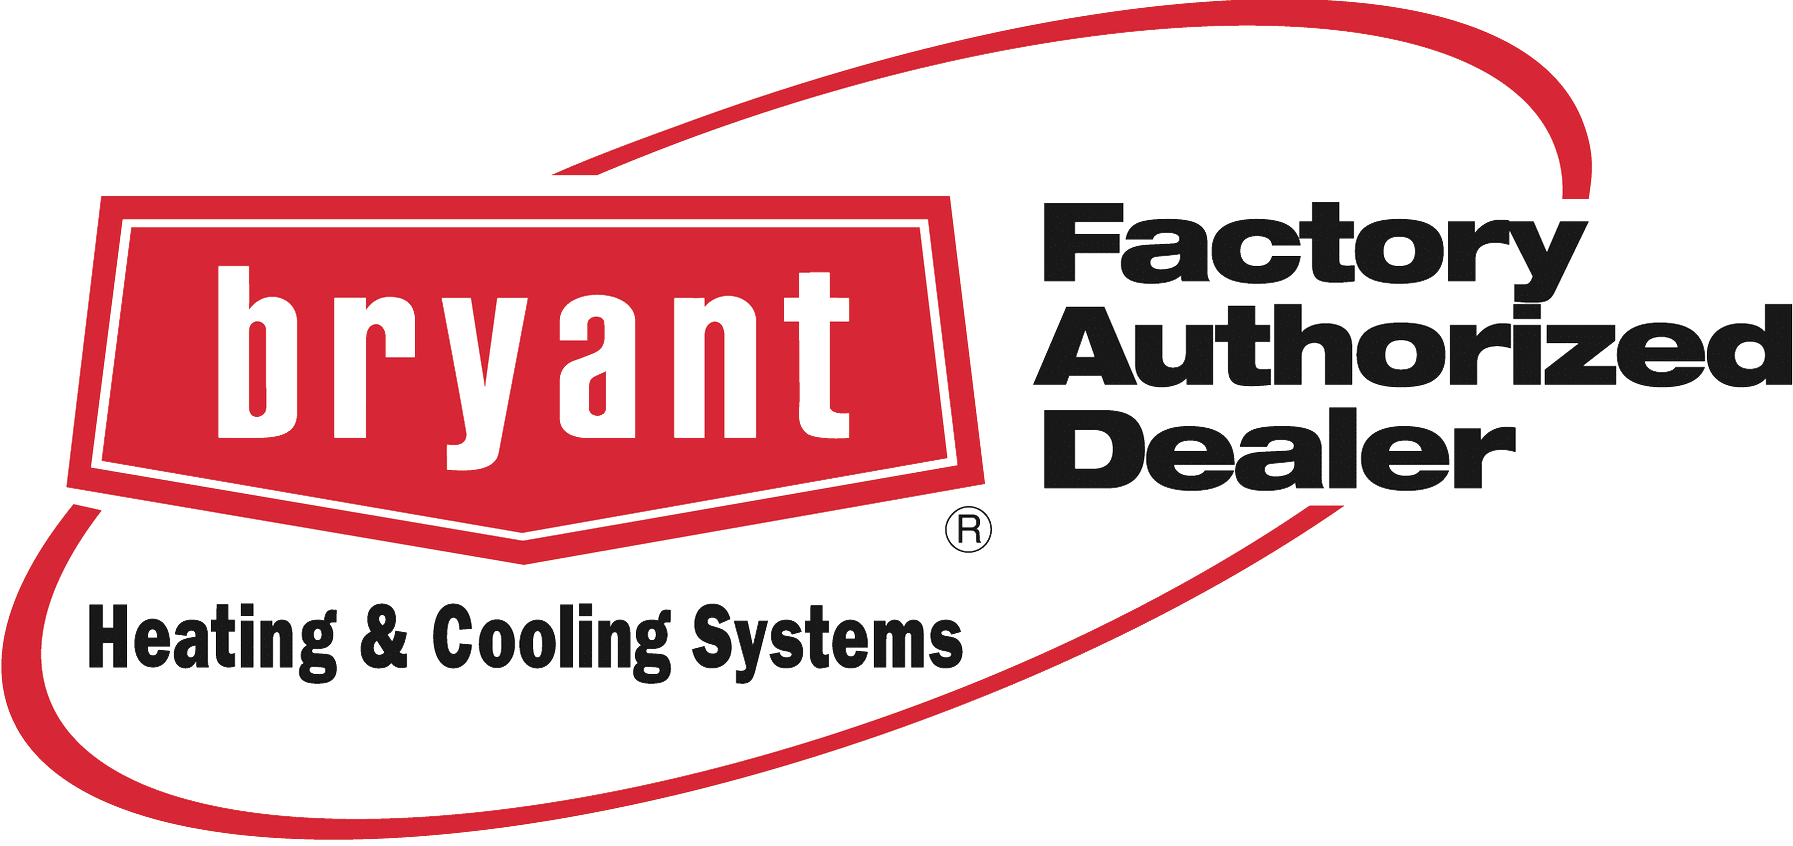 the bryant factory authorized dealer logo for heating and cooling systems .